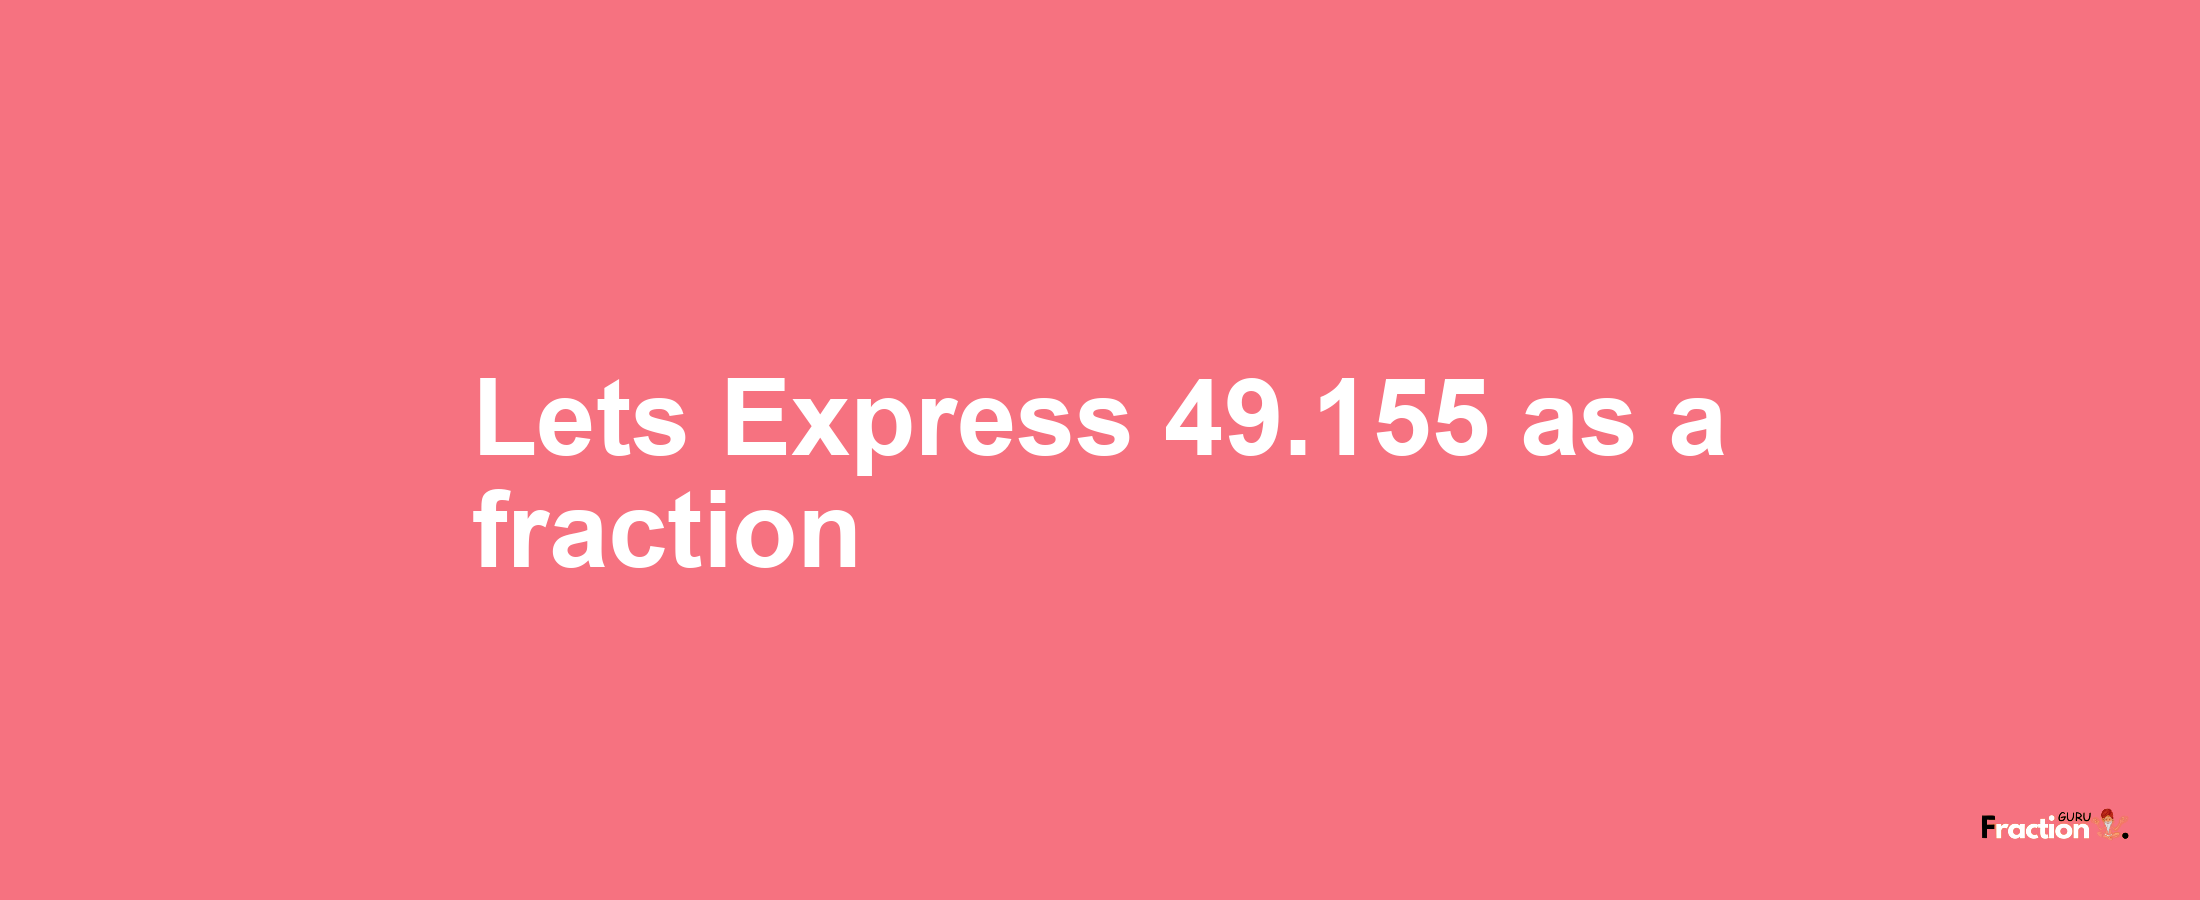 Lets Express 49.155 as afraction